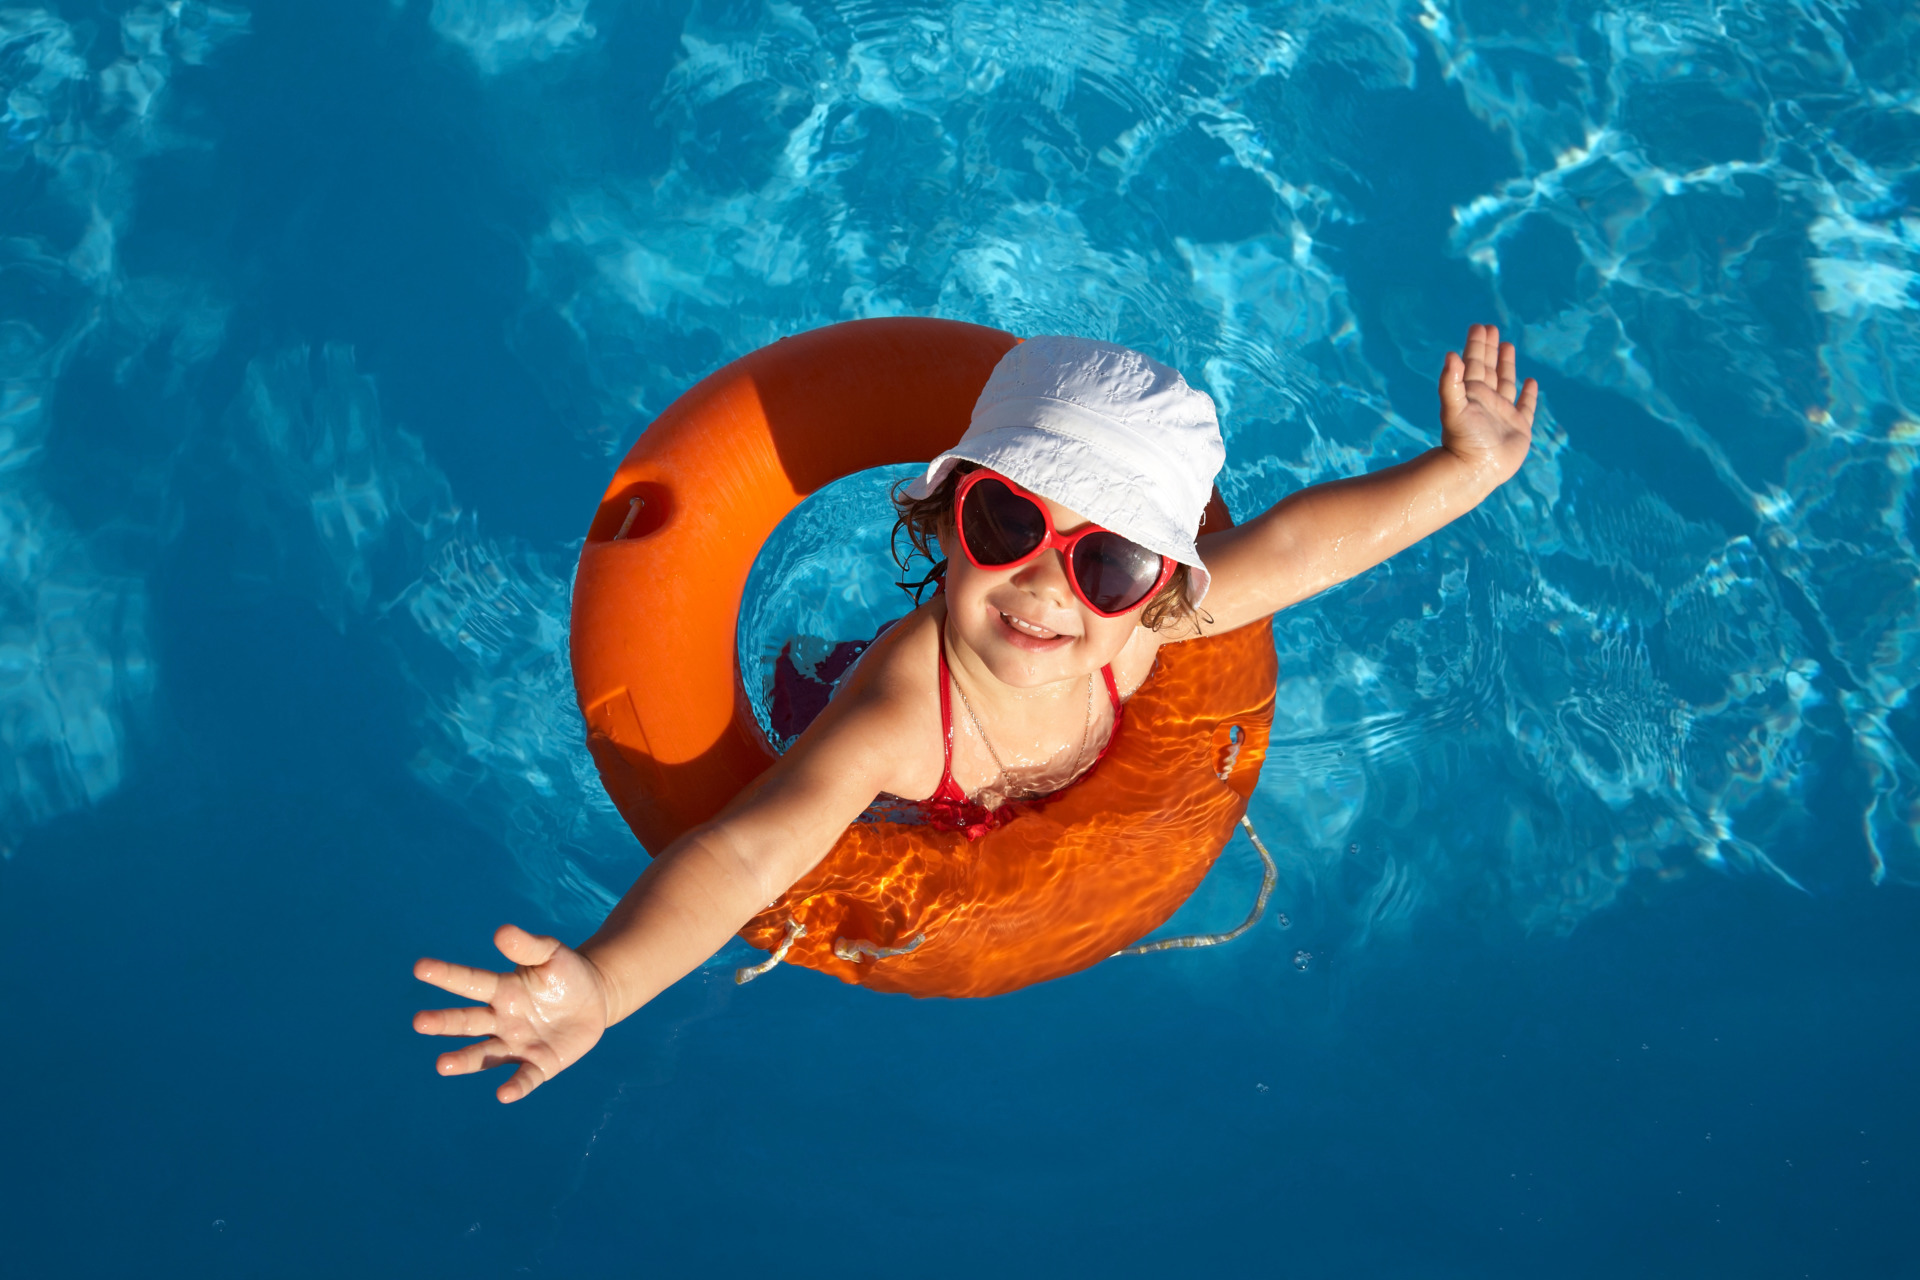 Water Safety and Kids